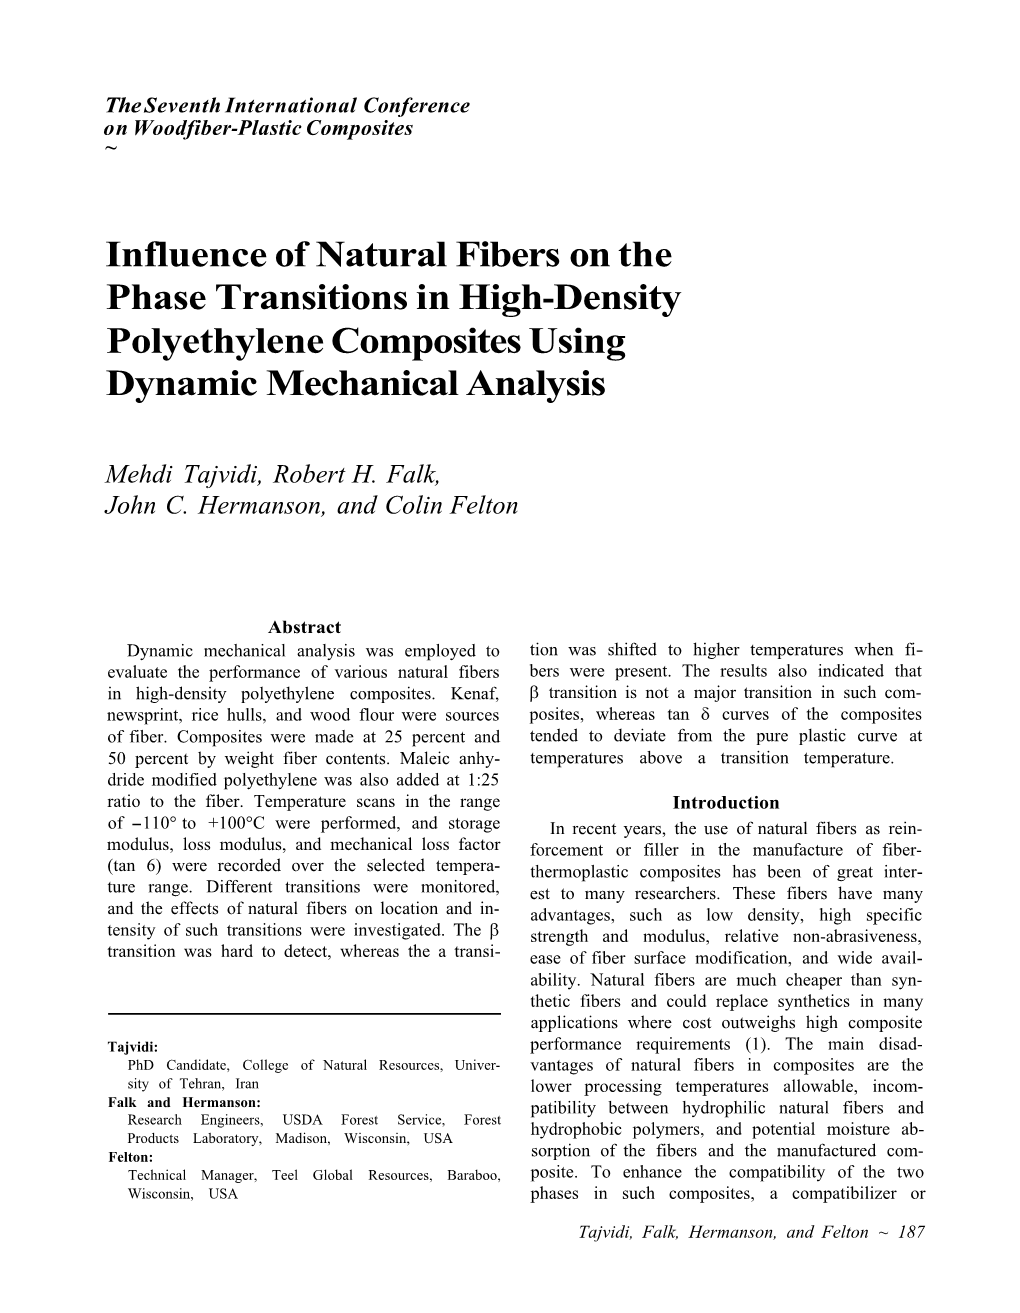 Influence of Natural Fibers on the Phase Transitions in High-Density Polyethylene Composites Using Dynamic Mechanical Analysis